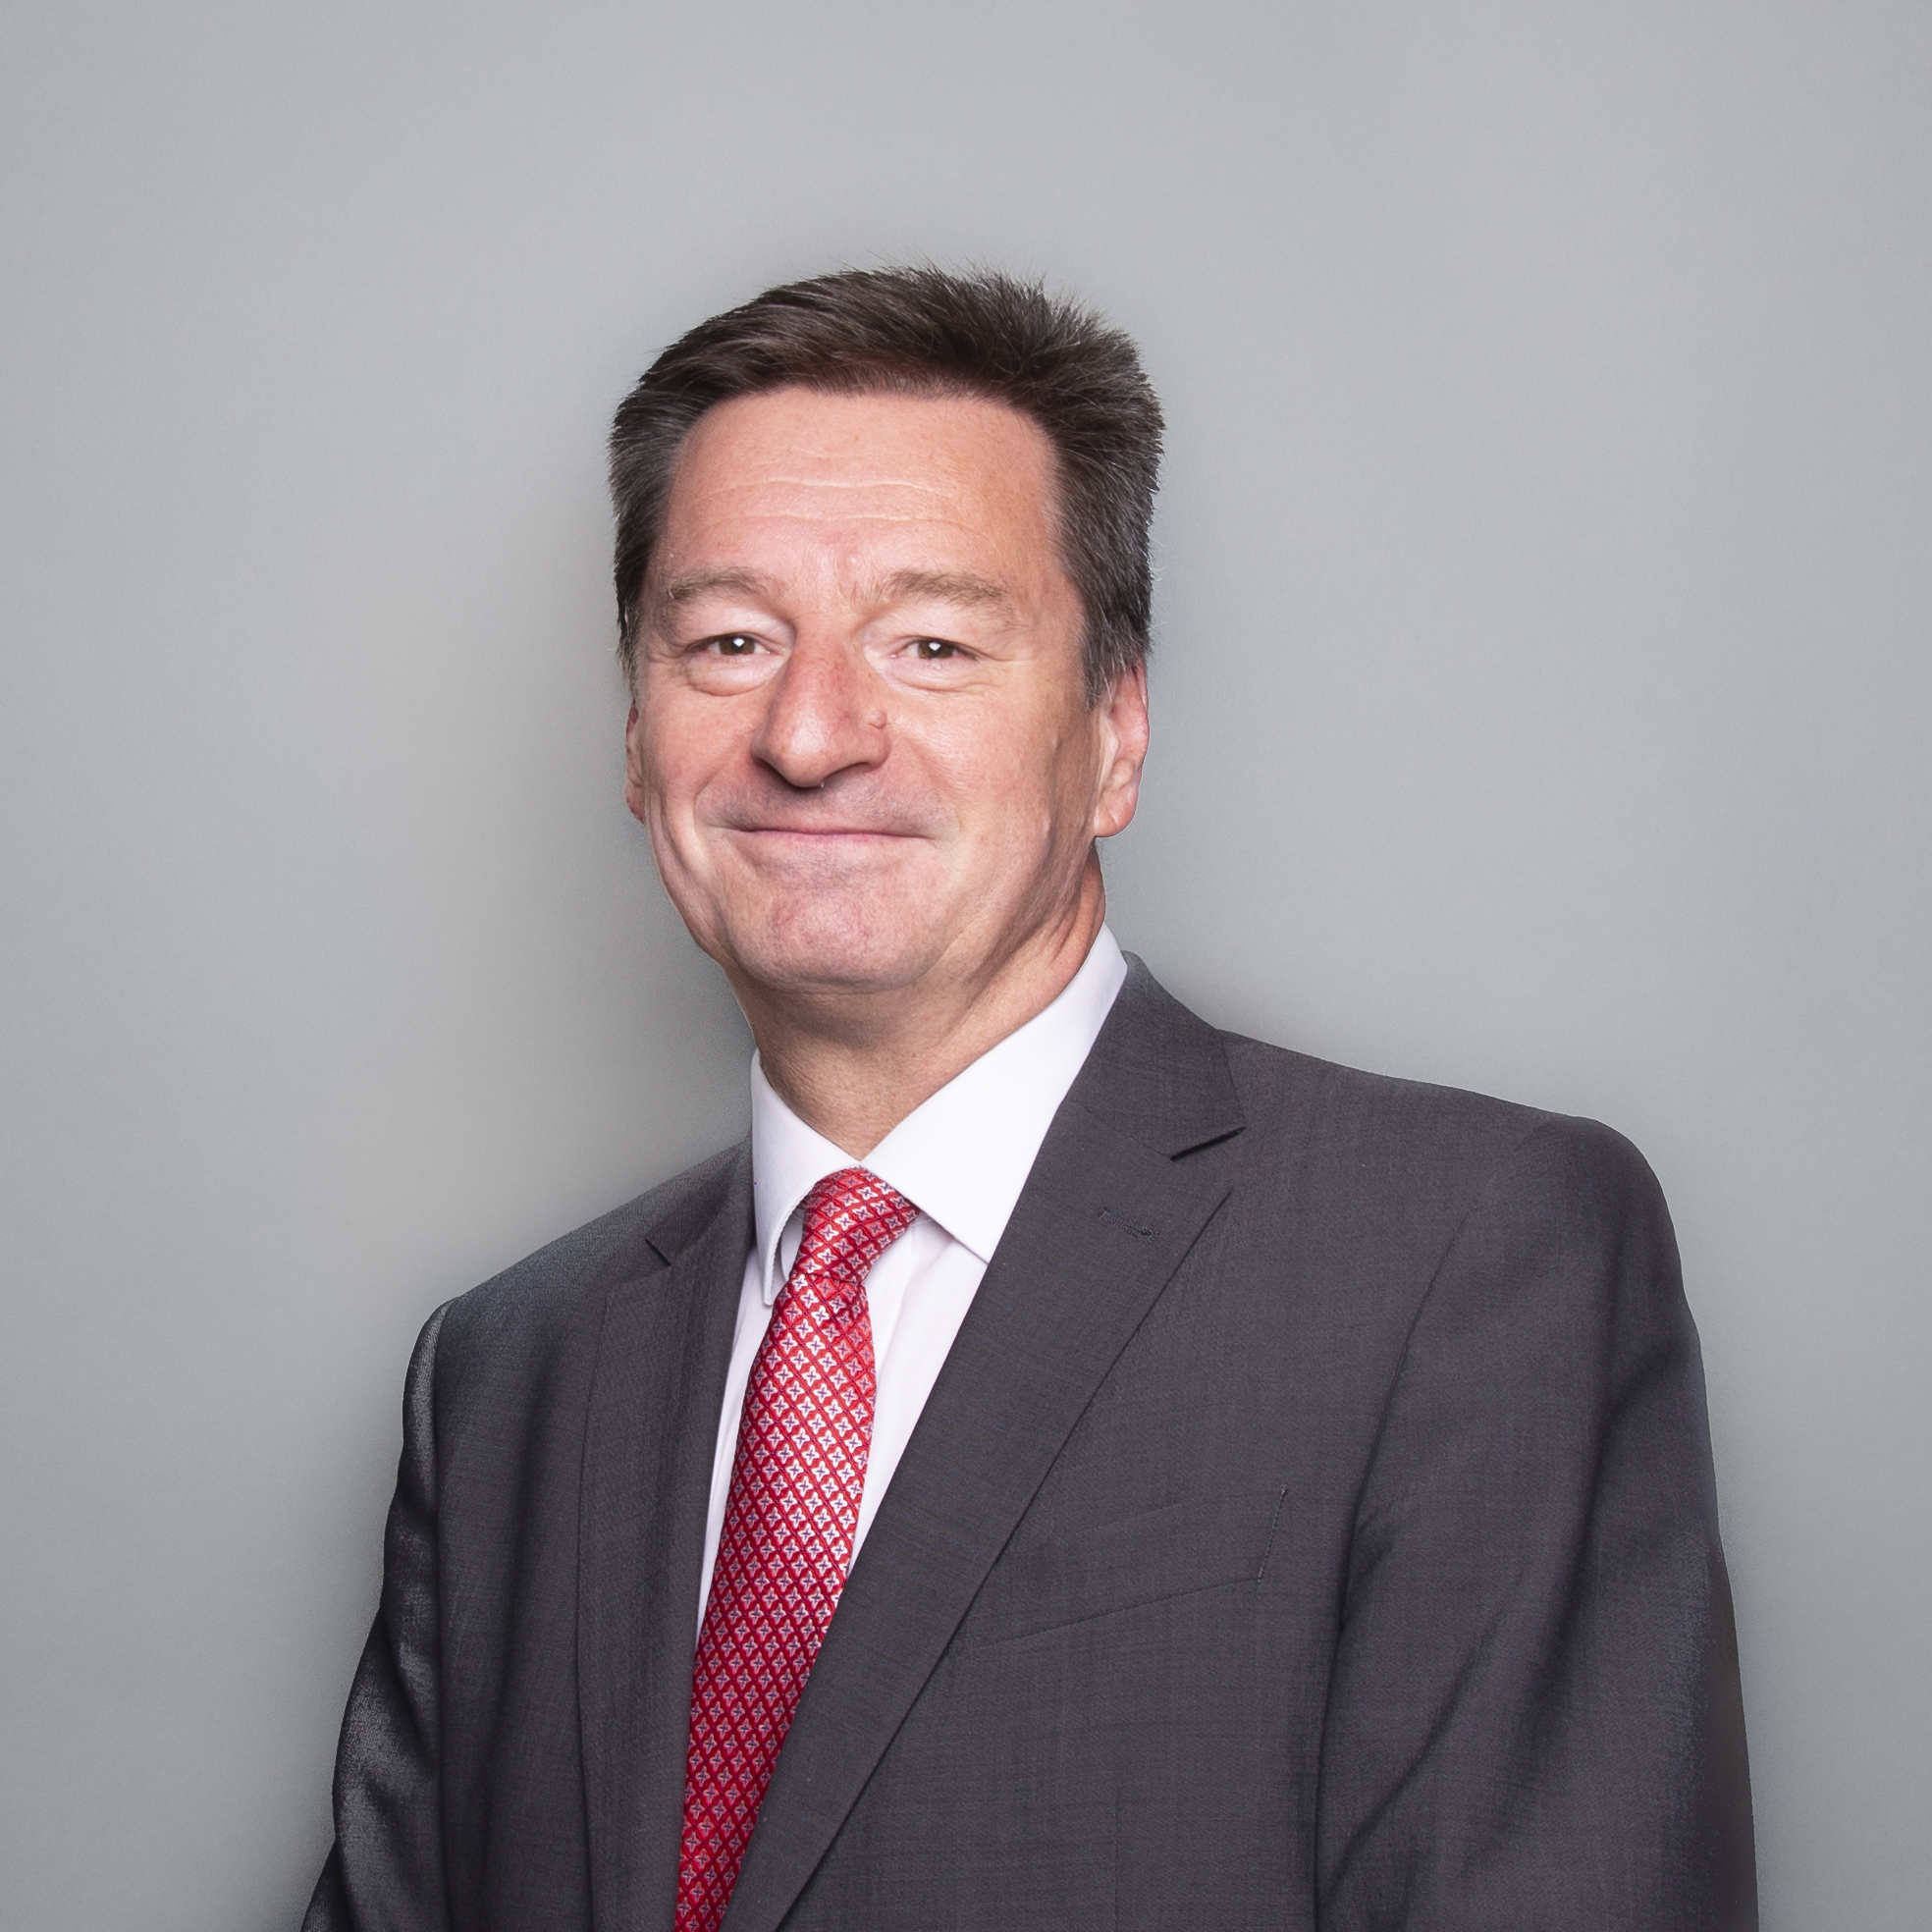 David Davidson to retire after 31 years with Cushman & Wakefield